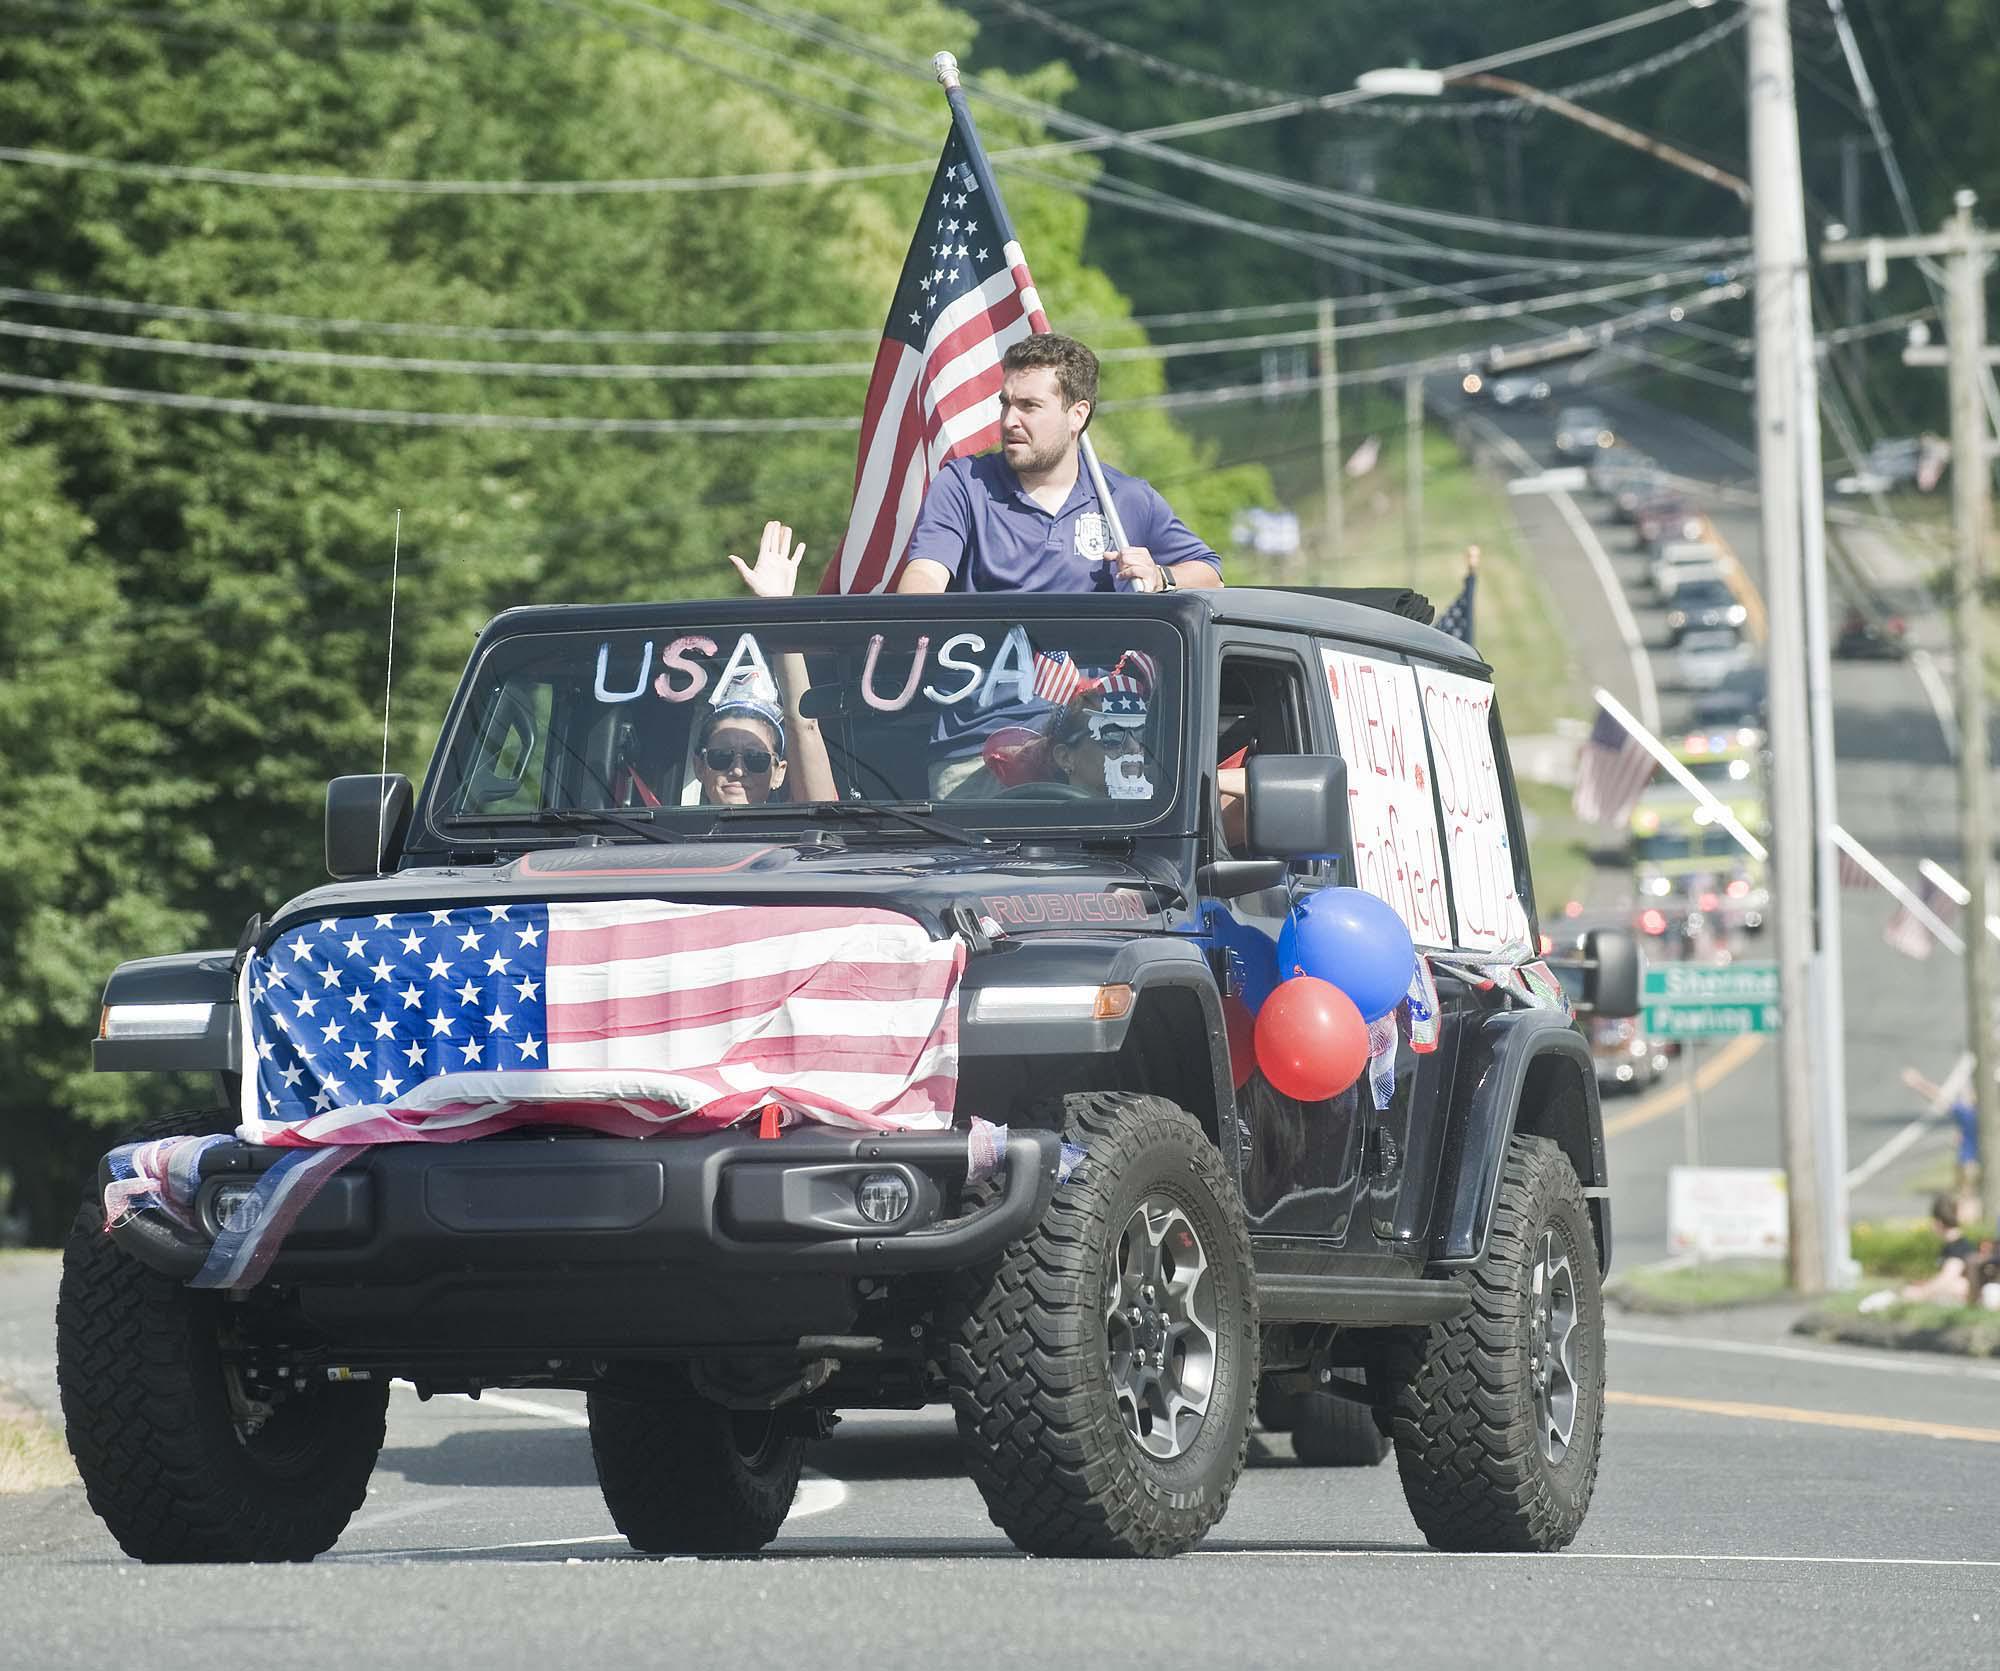 New Fairfield’s Fourth of July parade to return next month